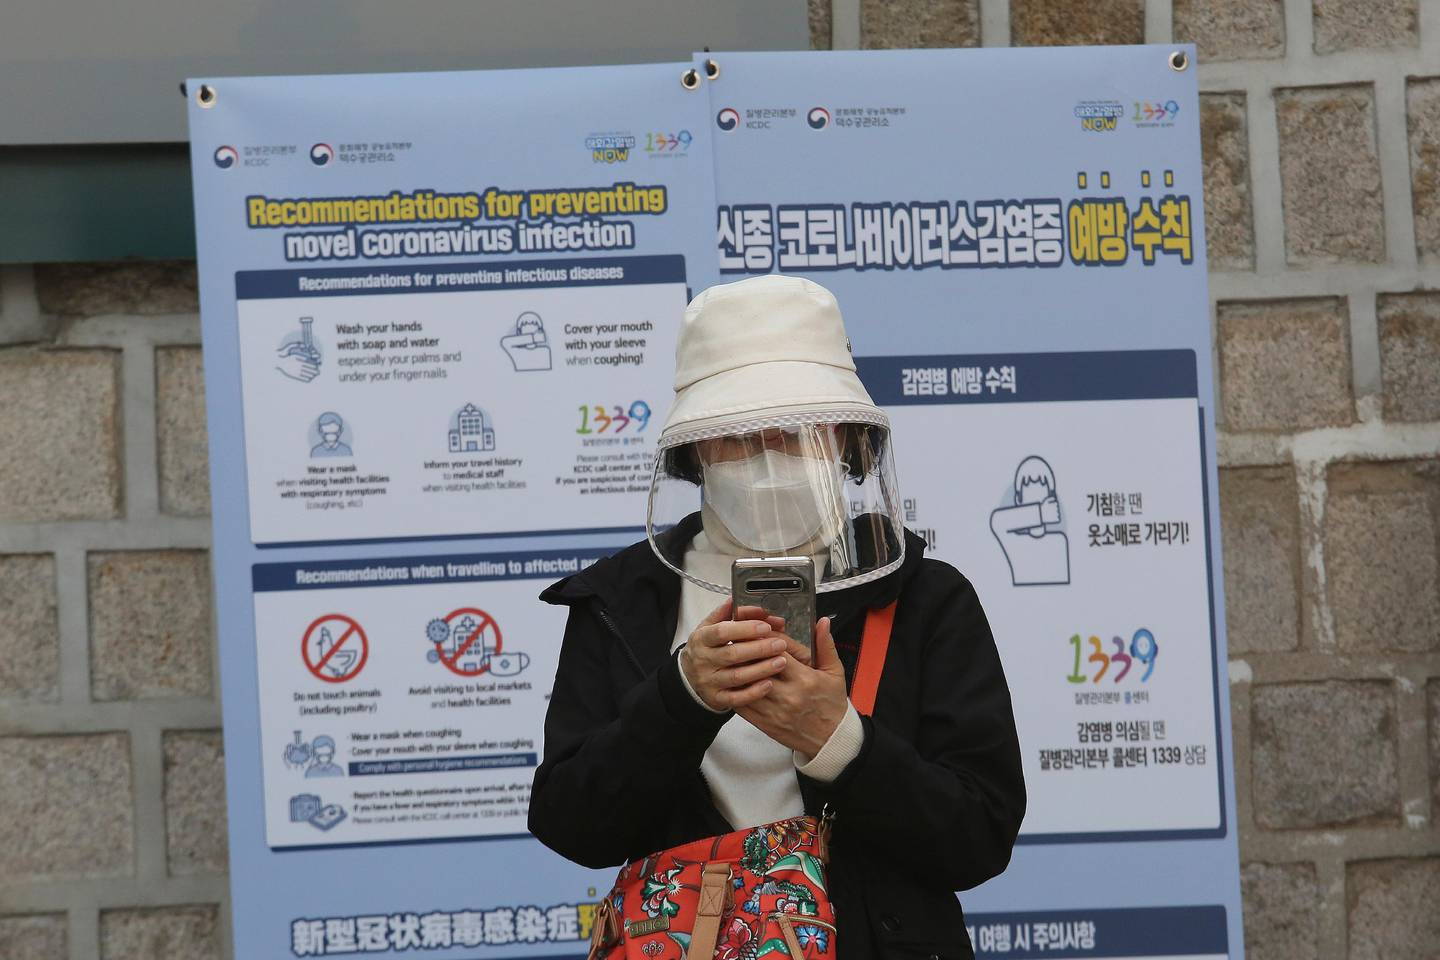 A woman wearing a face mask watches her smartphone in Seoul, South Korea, Saturday, March 21, 2020. For most people, the new coronavirus causes only mild or moderate symptoms, such as fever and cough. For some, especially older adults and people with existing health problems, it can cause more severe illness, including pneumonia. (AP Photo/Ahn Young-joon)